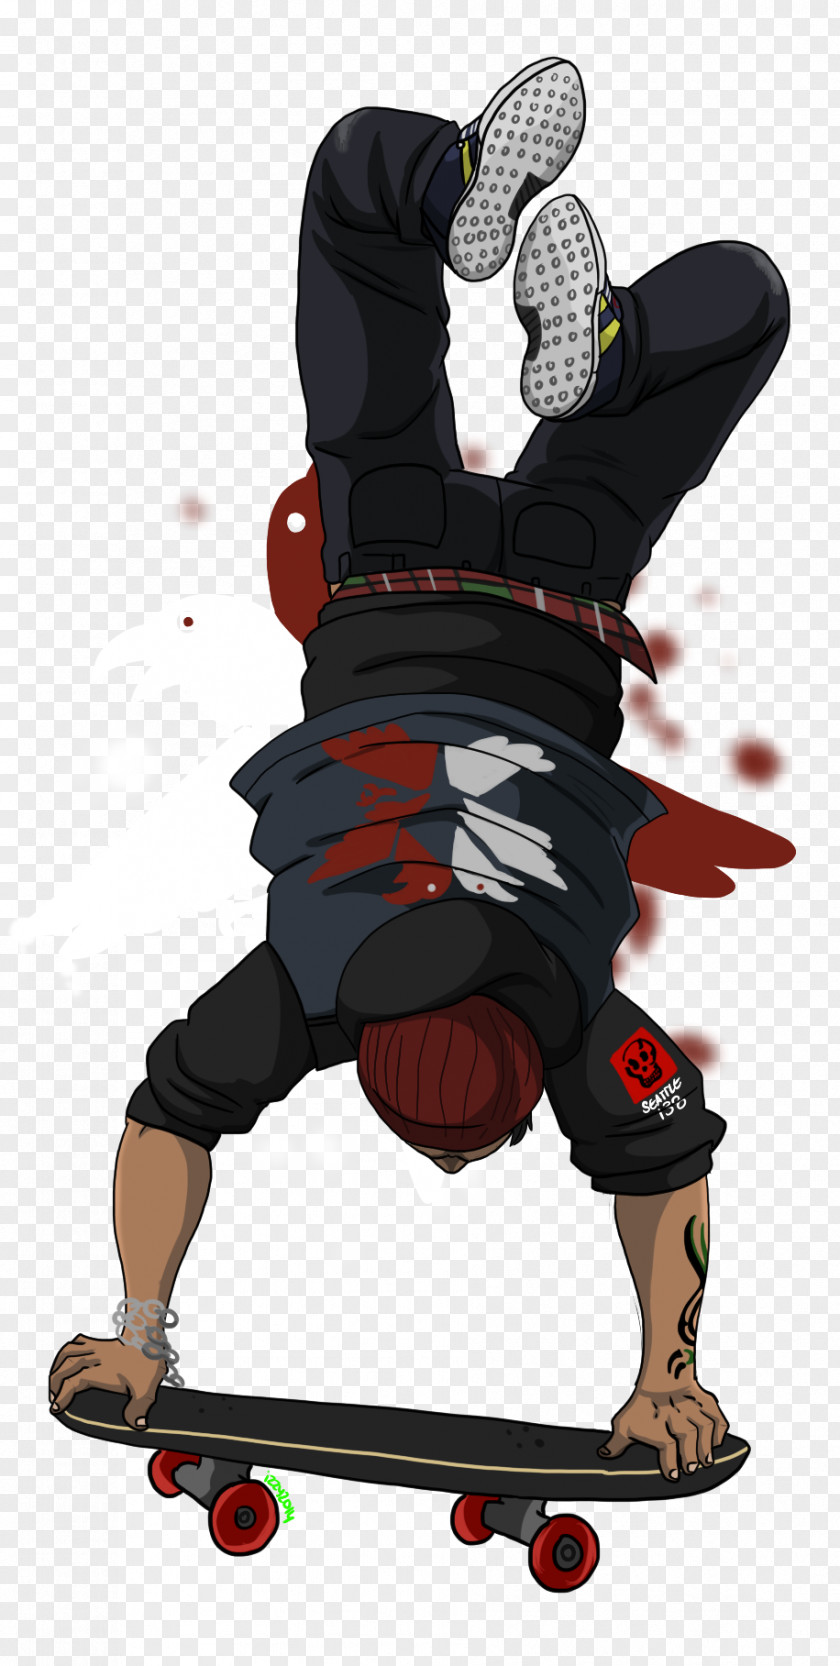 Handstand Infamous Second Son Freeboard Delsin Rowe Art Injustice 2 PNG